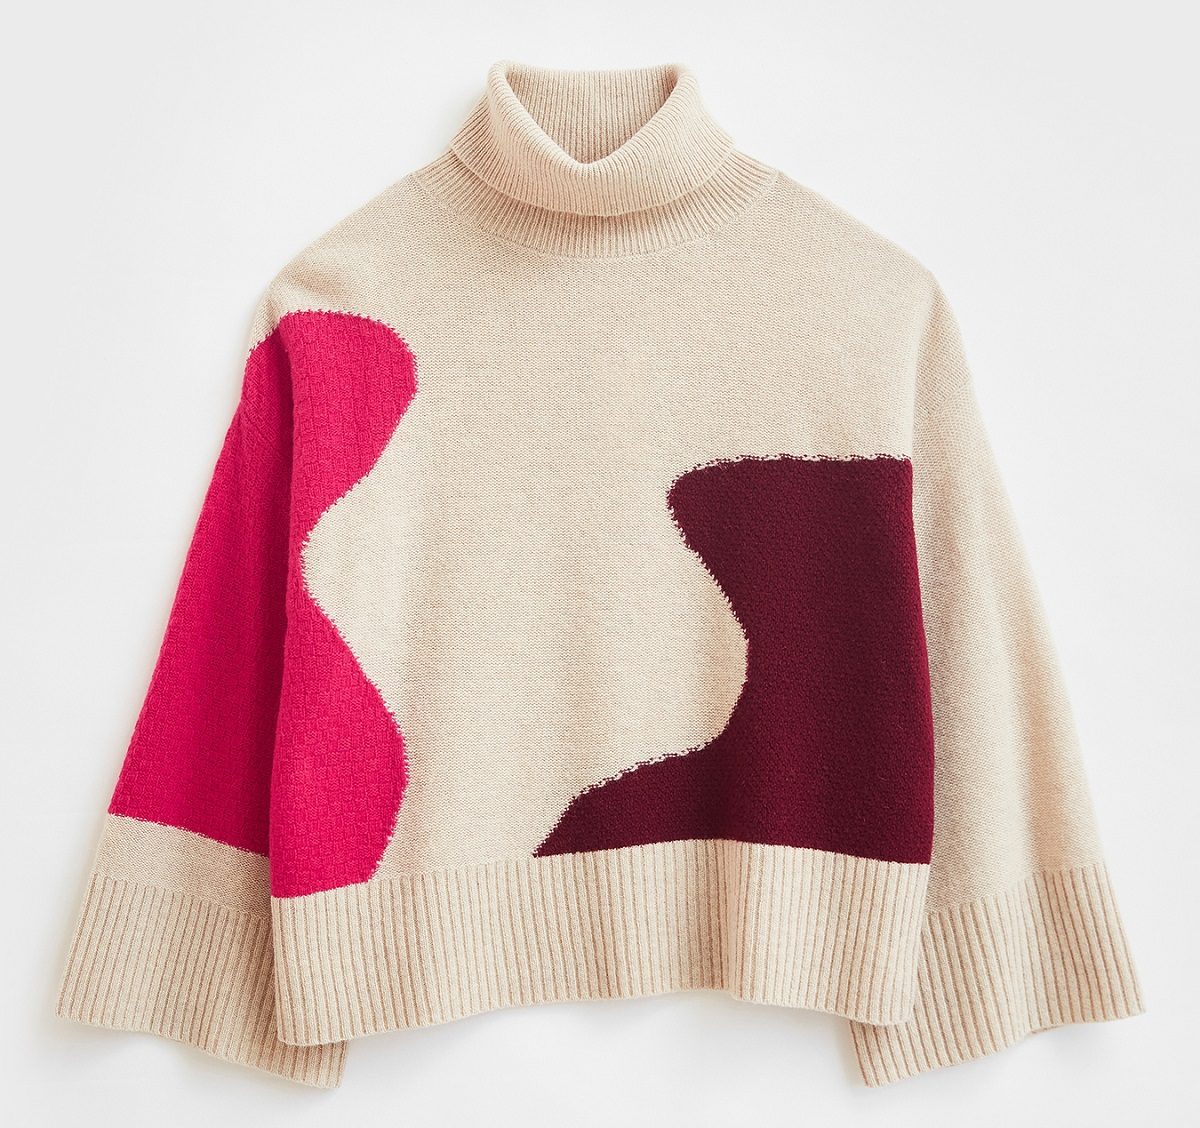 Very - White Stuff Abstract Wool Mix Funnel Neck Jumper - Plum - £59 for Silver Magazine www.silvermagazine.co.uk